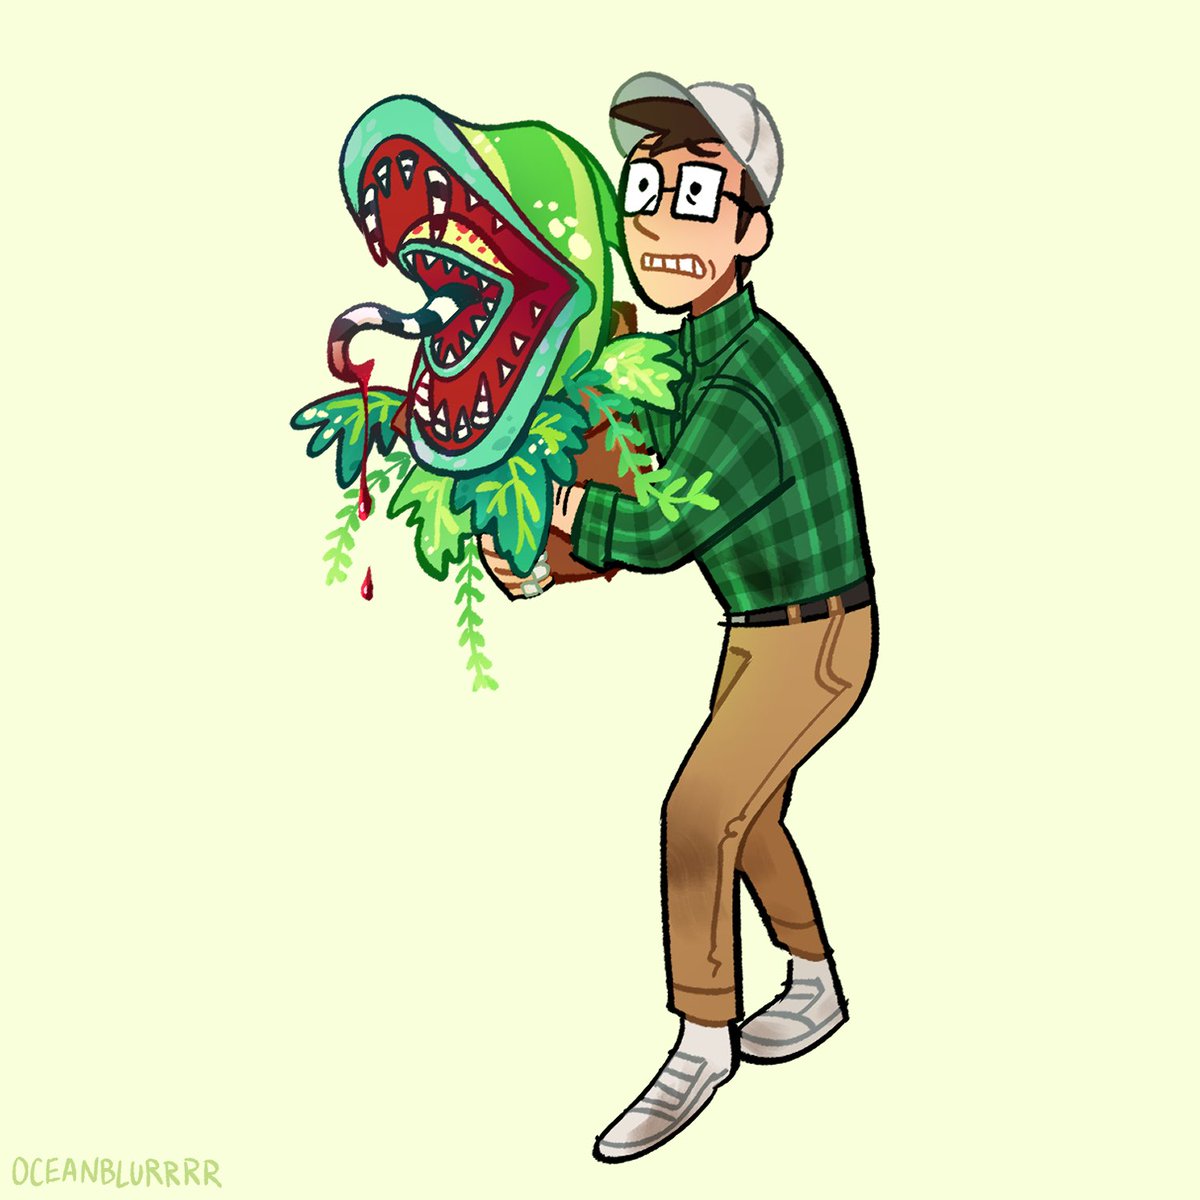 What if I put two of my favorite things together 🩸🌱 #beetlejuicethemusical #littleshopofhorrors